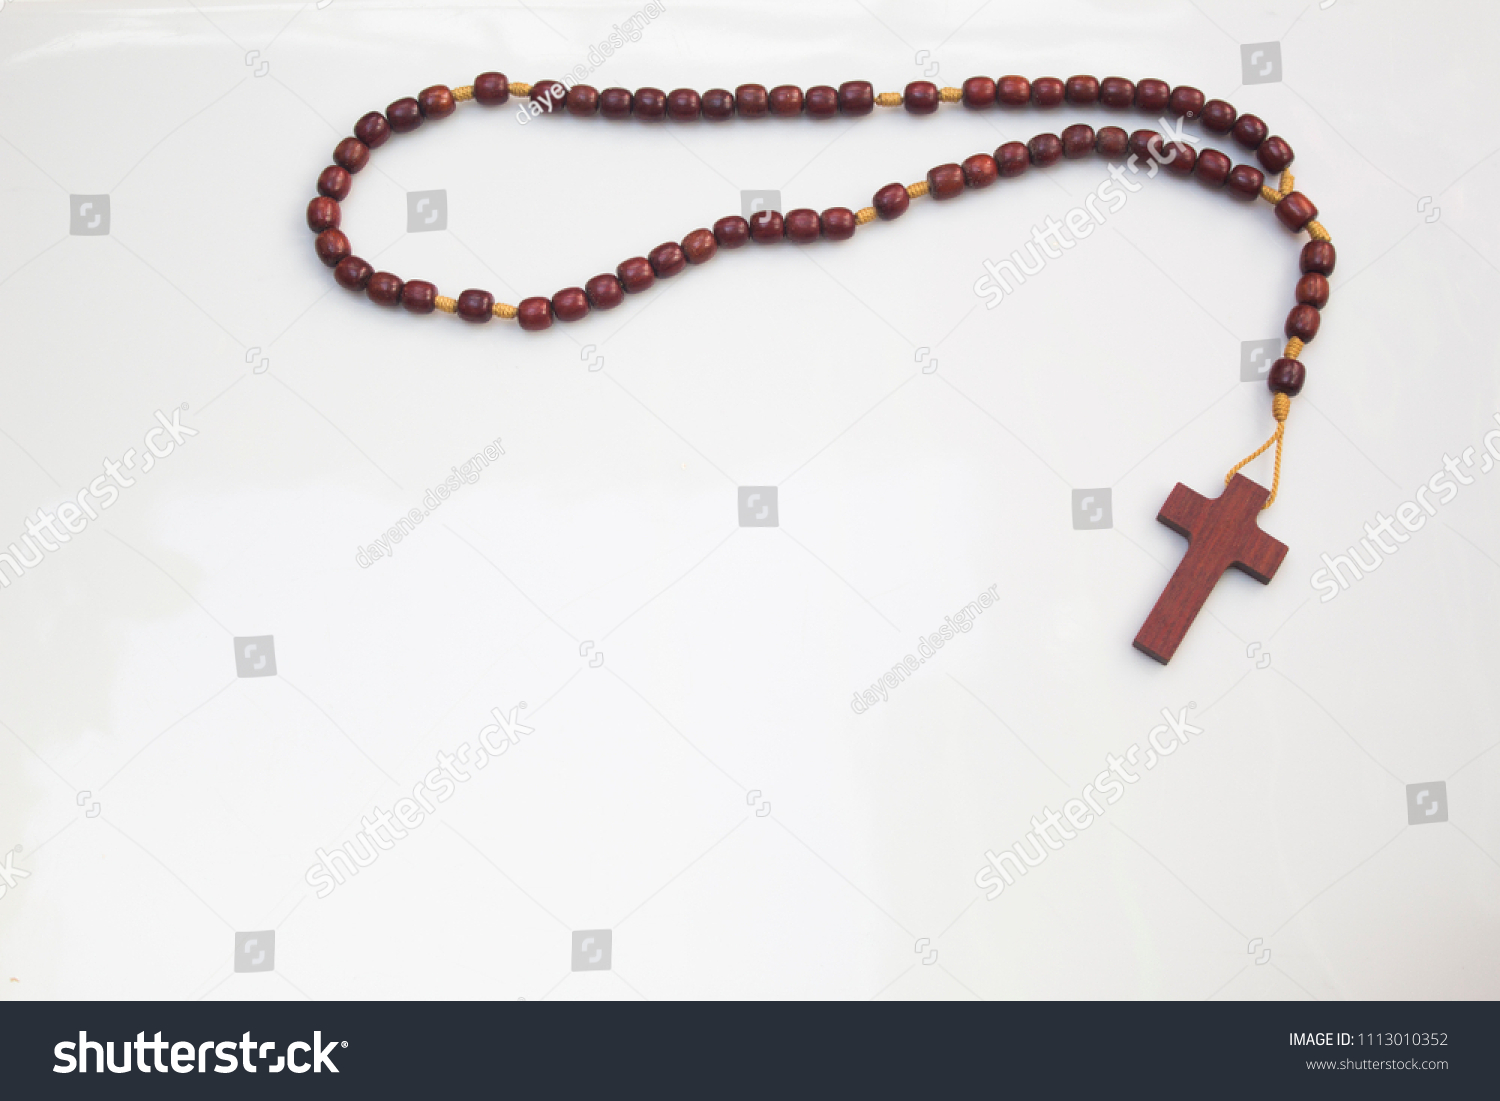 Wood rosary in white background #1113010352